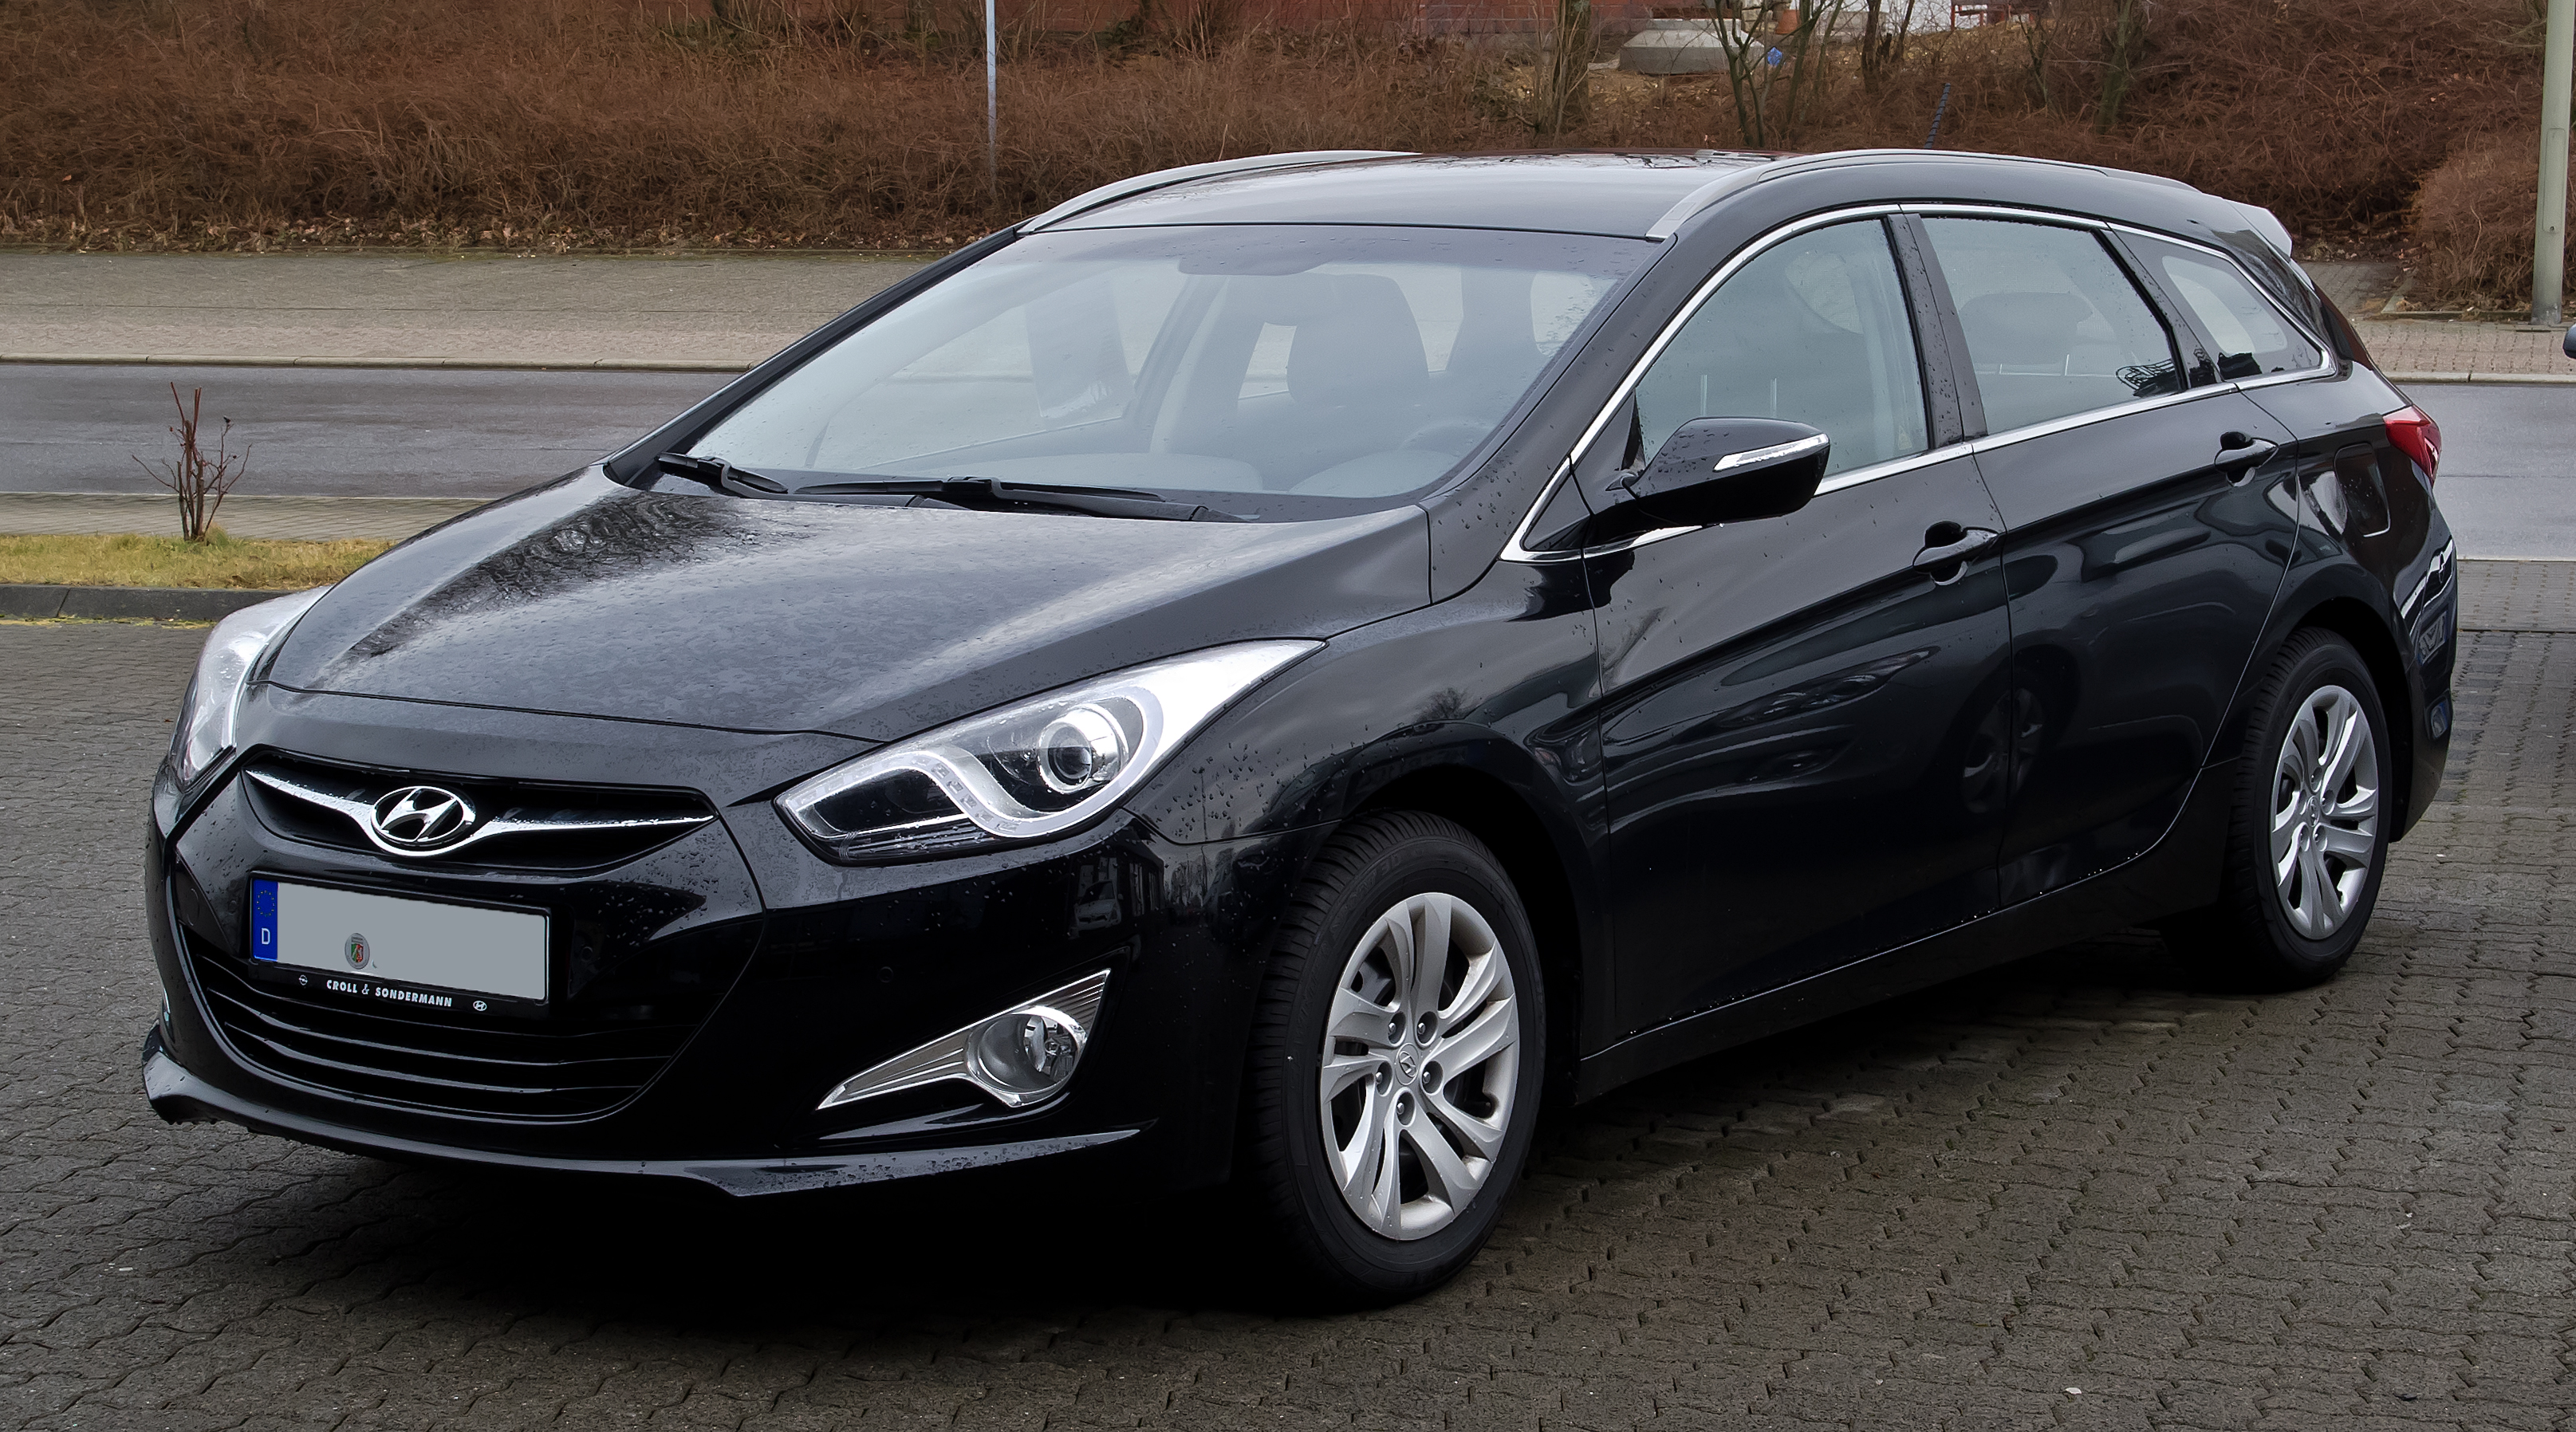 Hyundai i40cw technical details, history, photos on Better